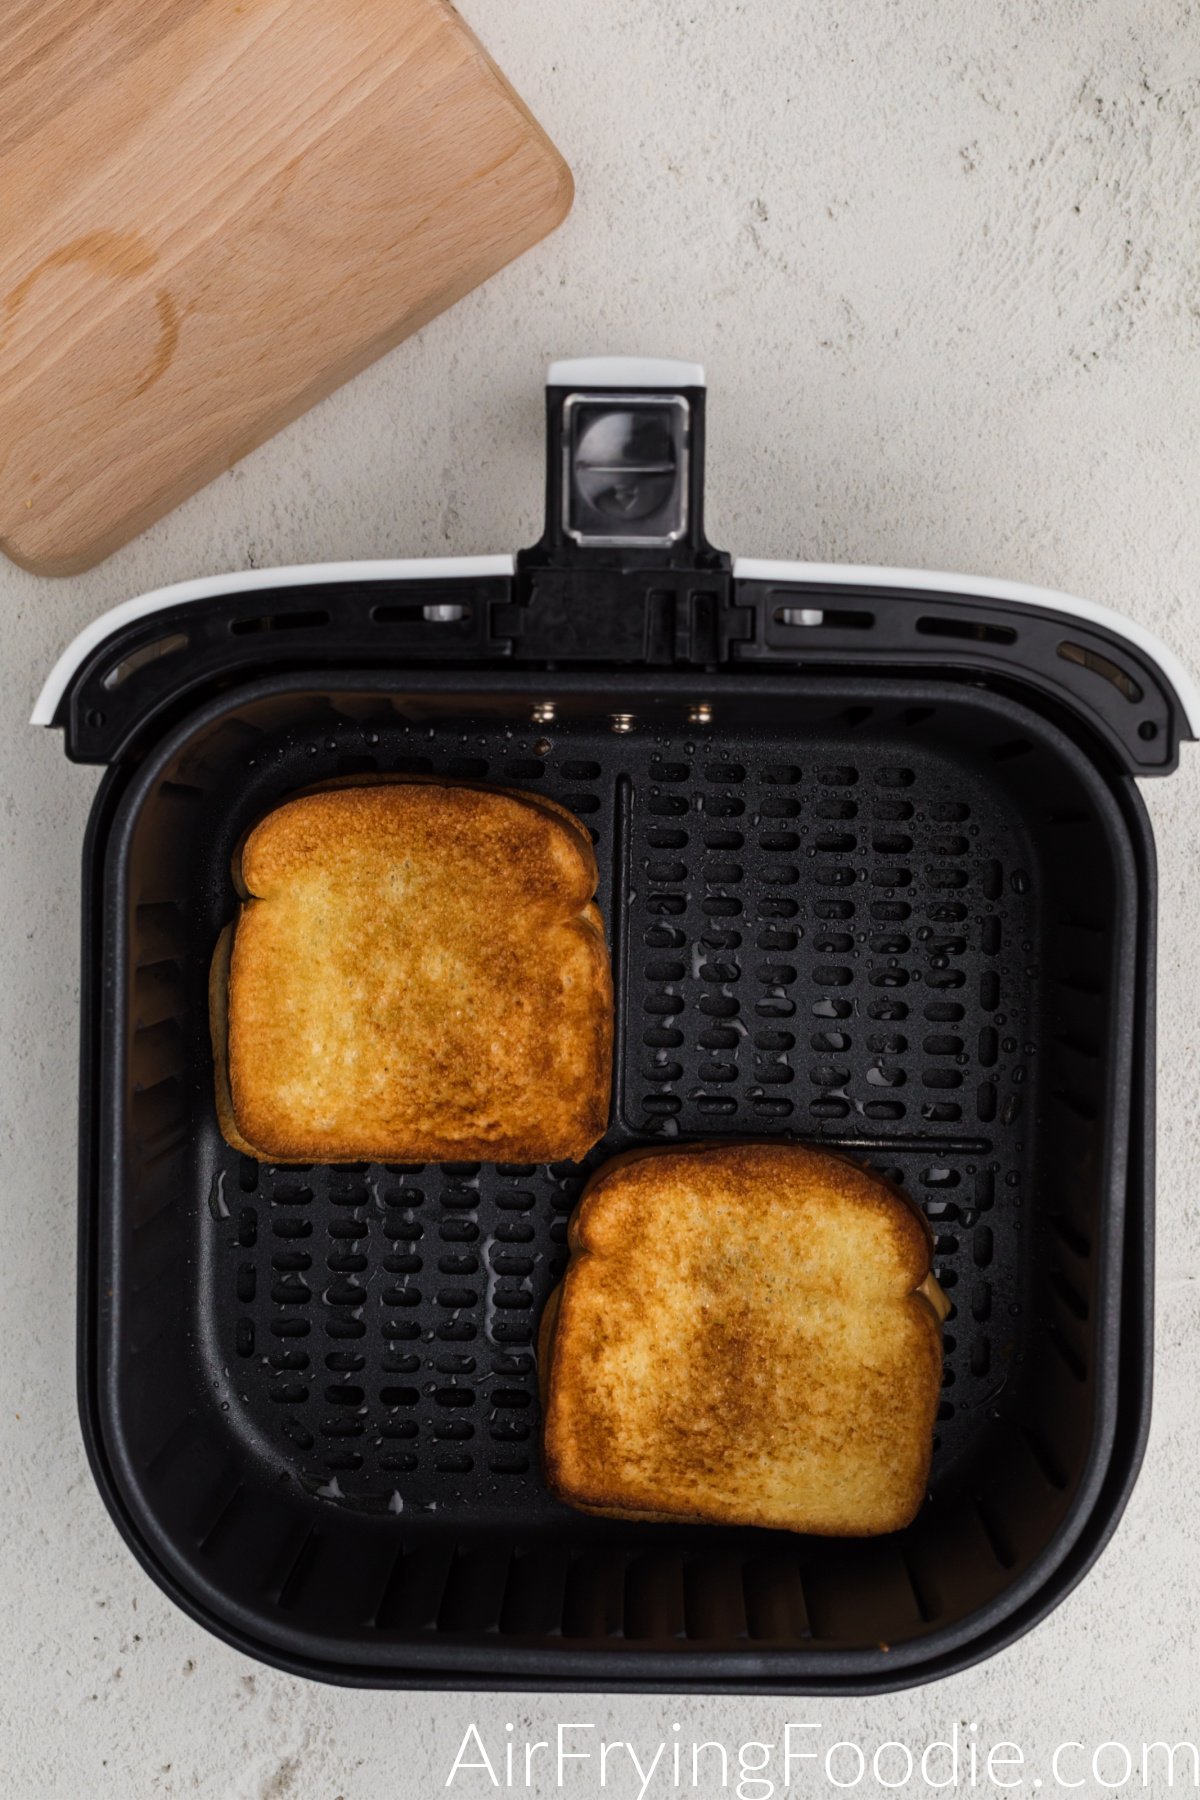 Golden brown air fried peanut butter and jelly sandwiches in the air fryer basket.